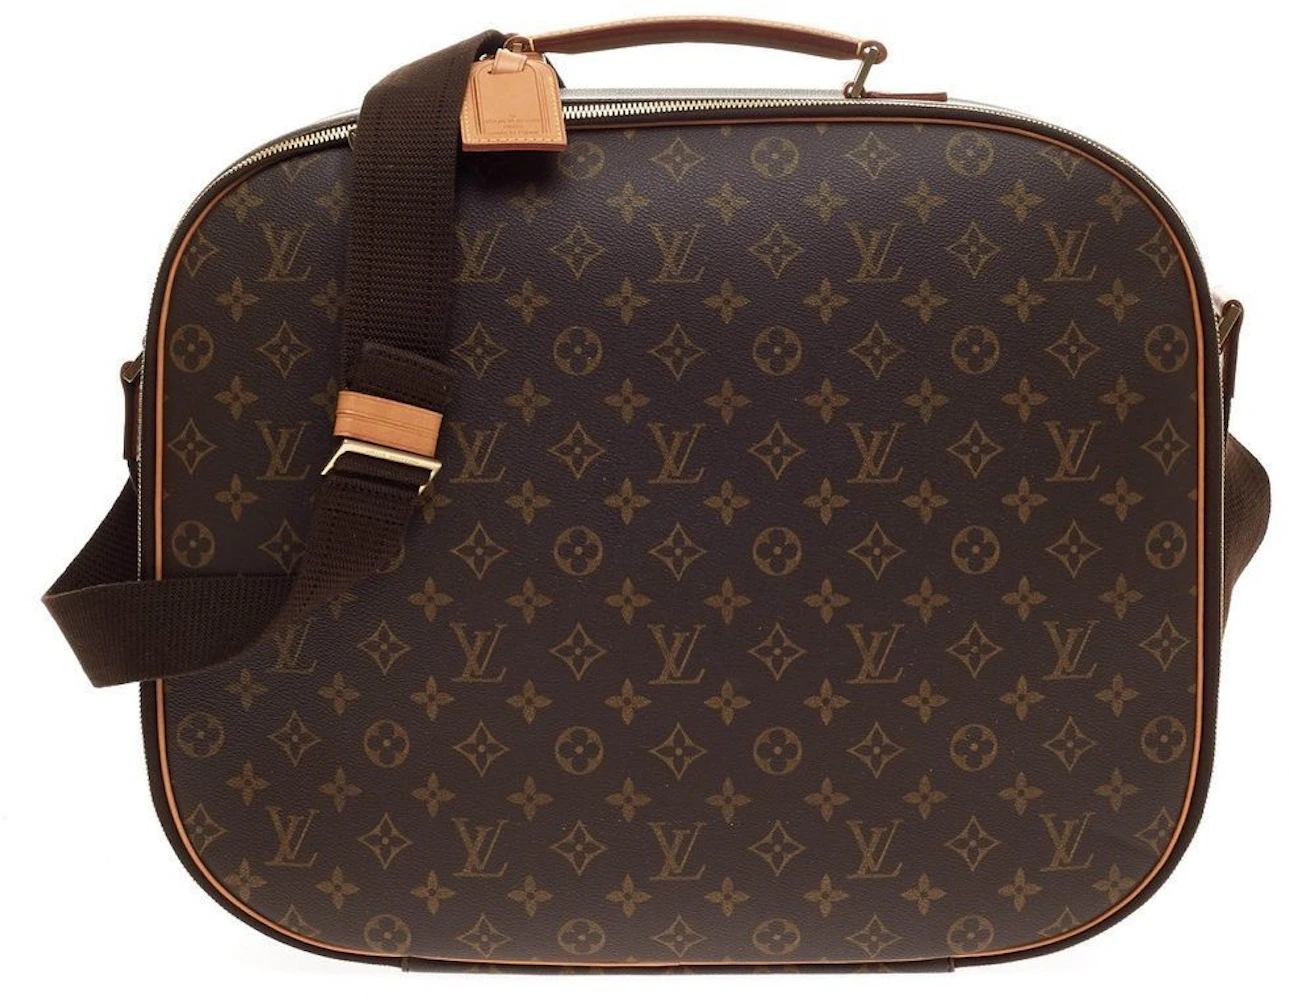 Louis Vuitton Discontinued Monogram Packall PM 2way Bandouliere Trunk 64lv23s